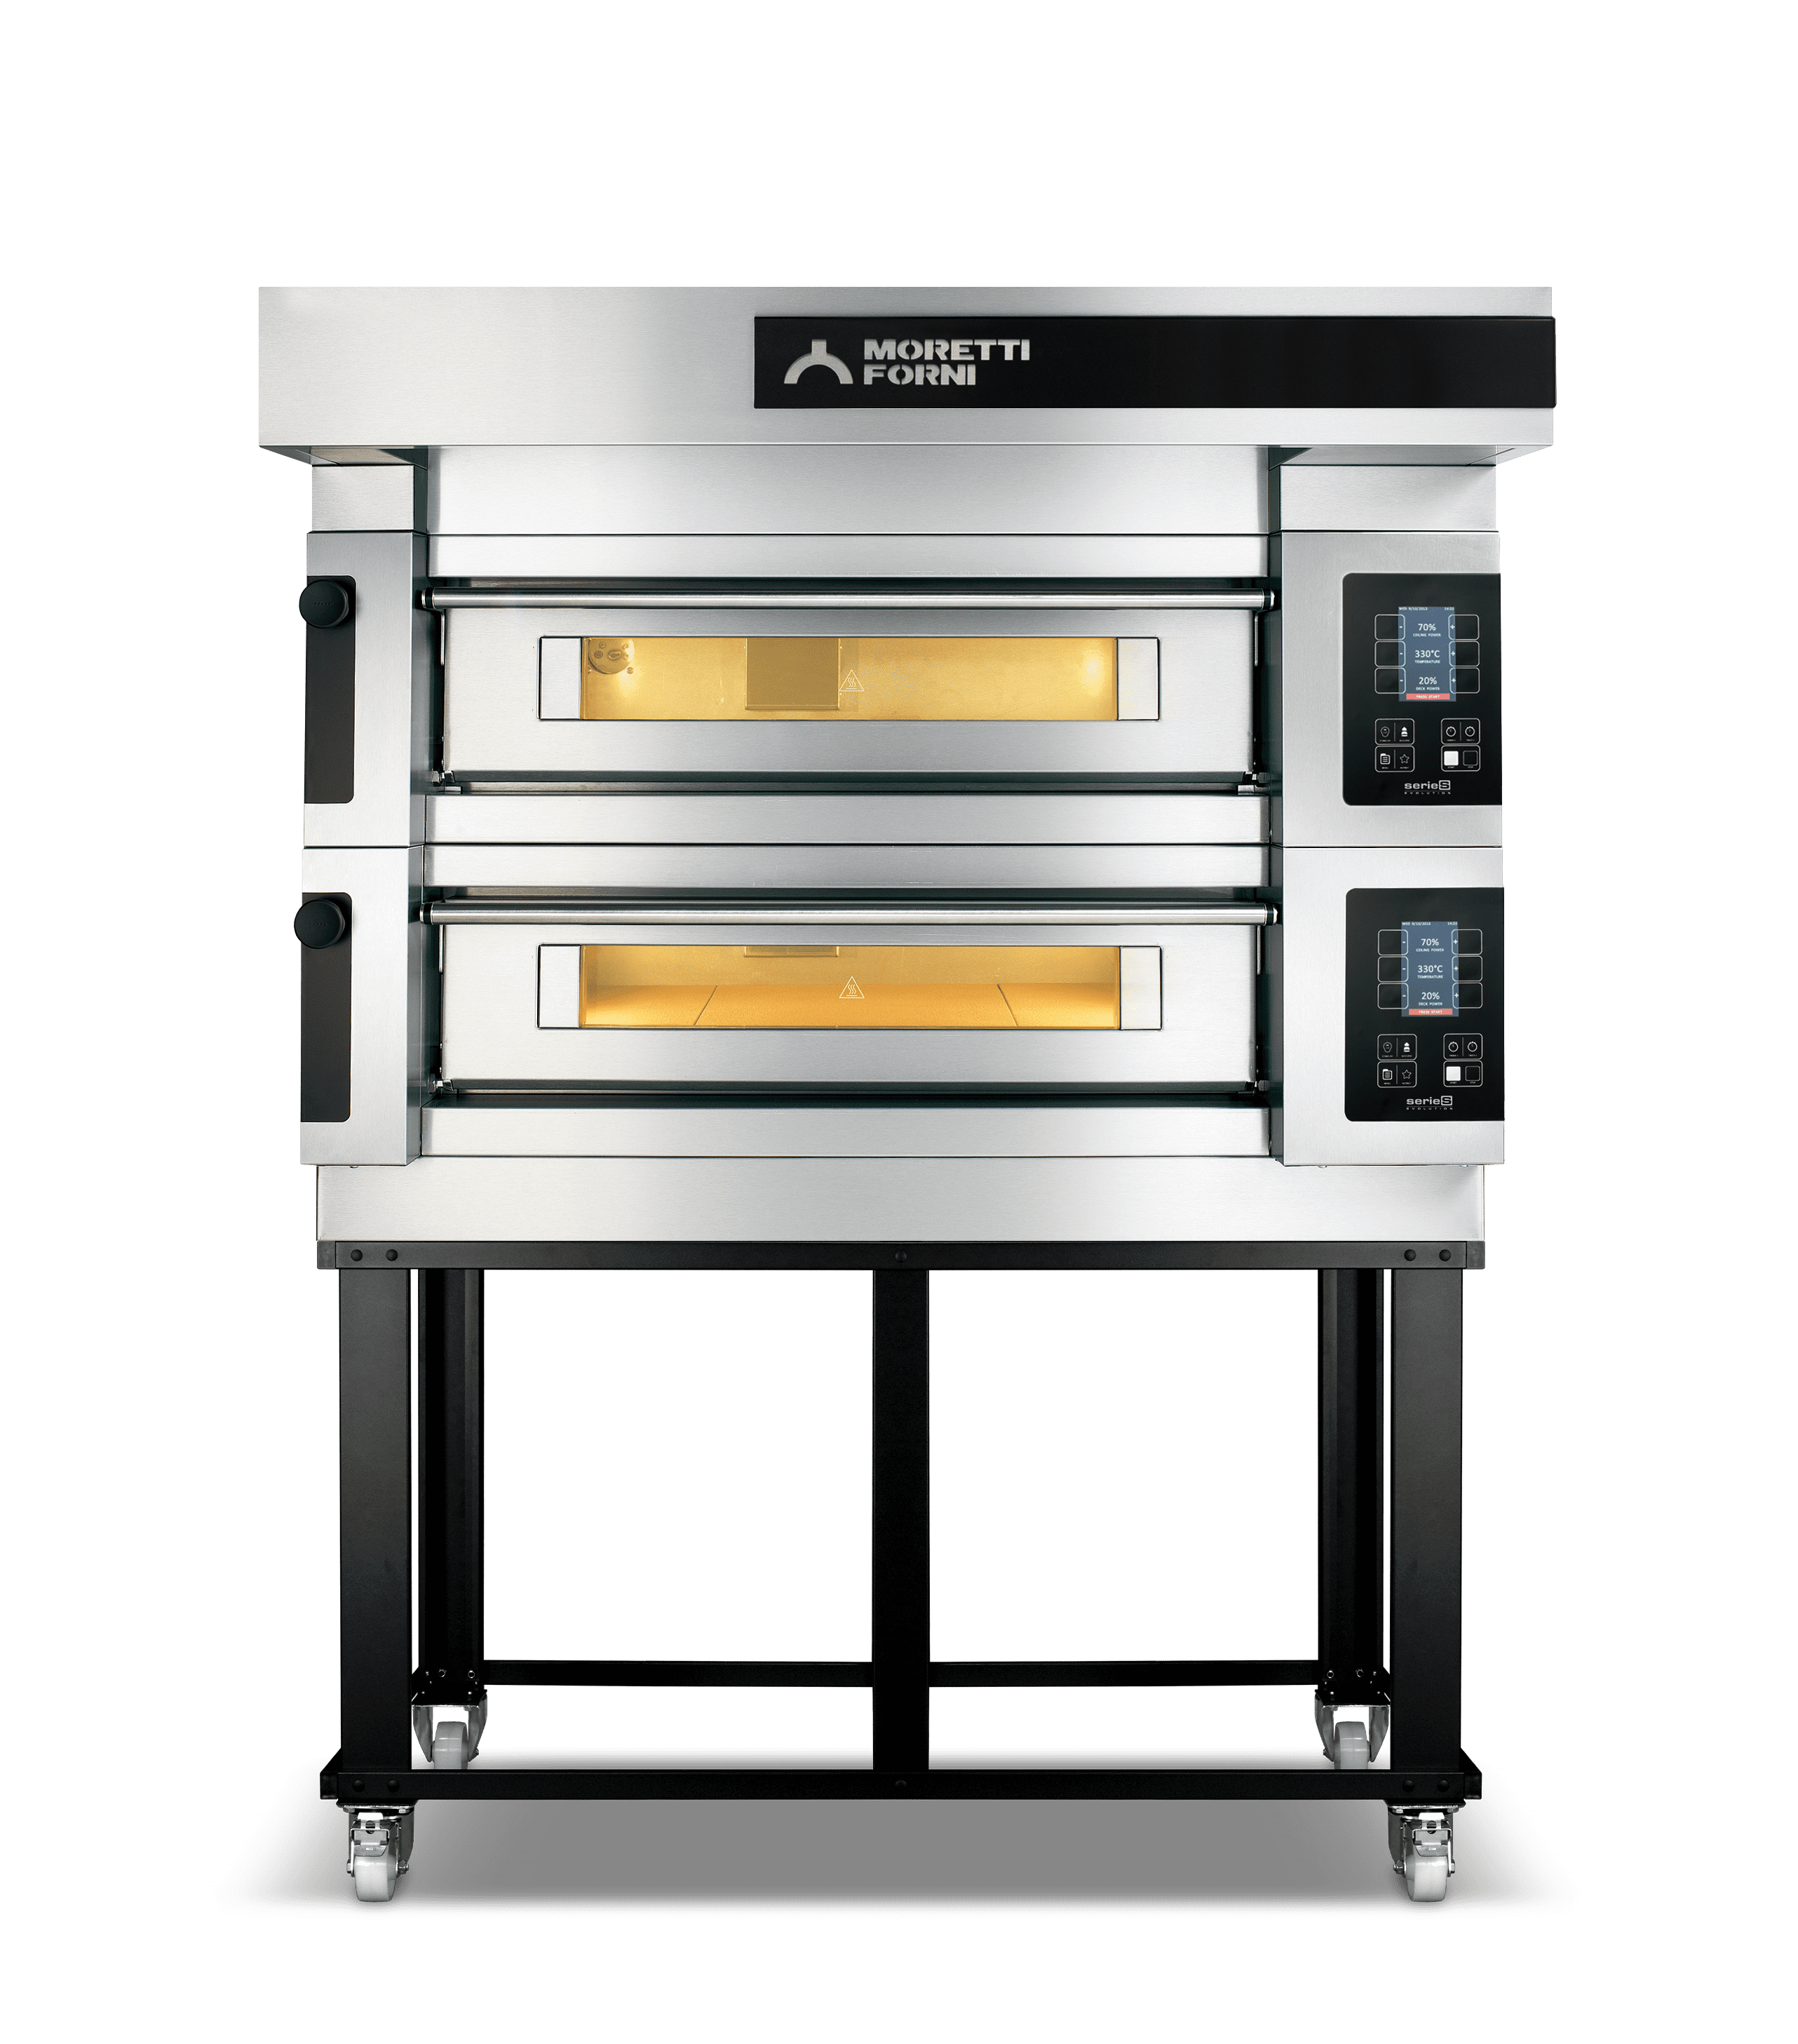 S105E - serie S modular Electric Pizza oven 37-1/2"x49-3/4"x6-1/4" (Chamber)